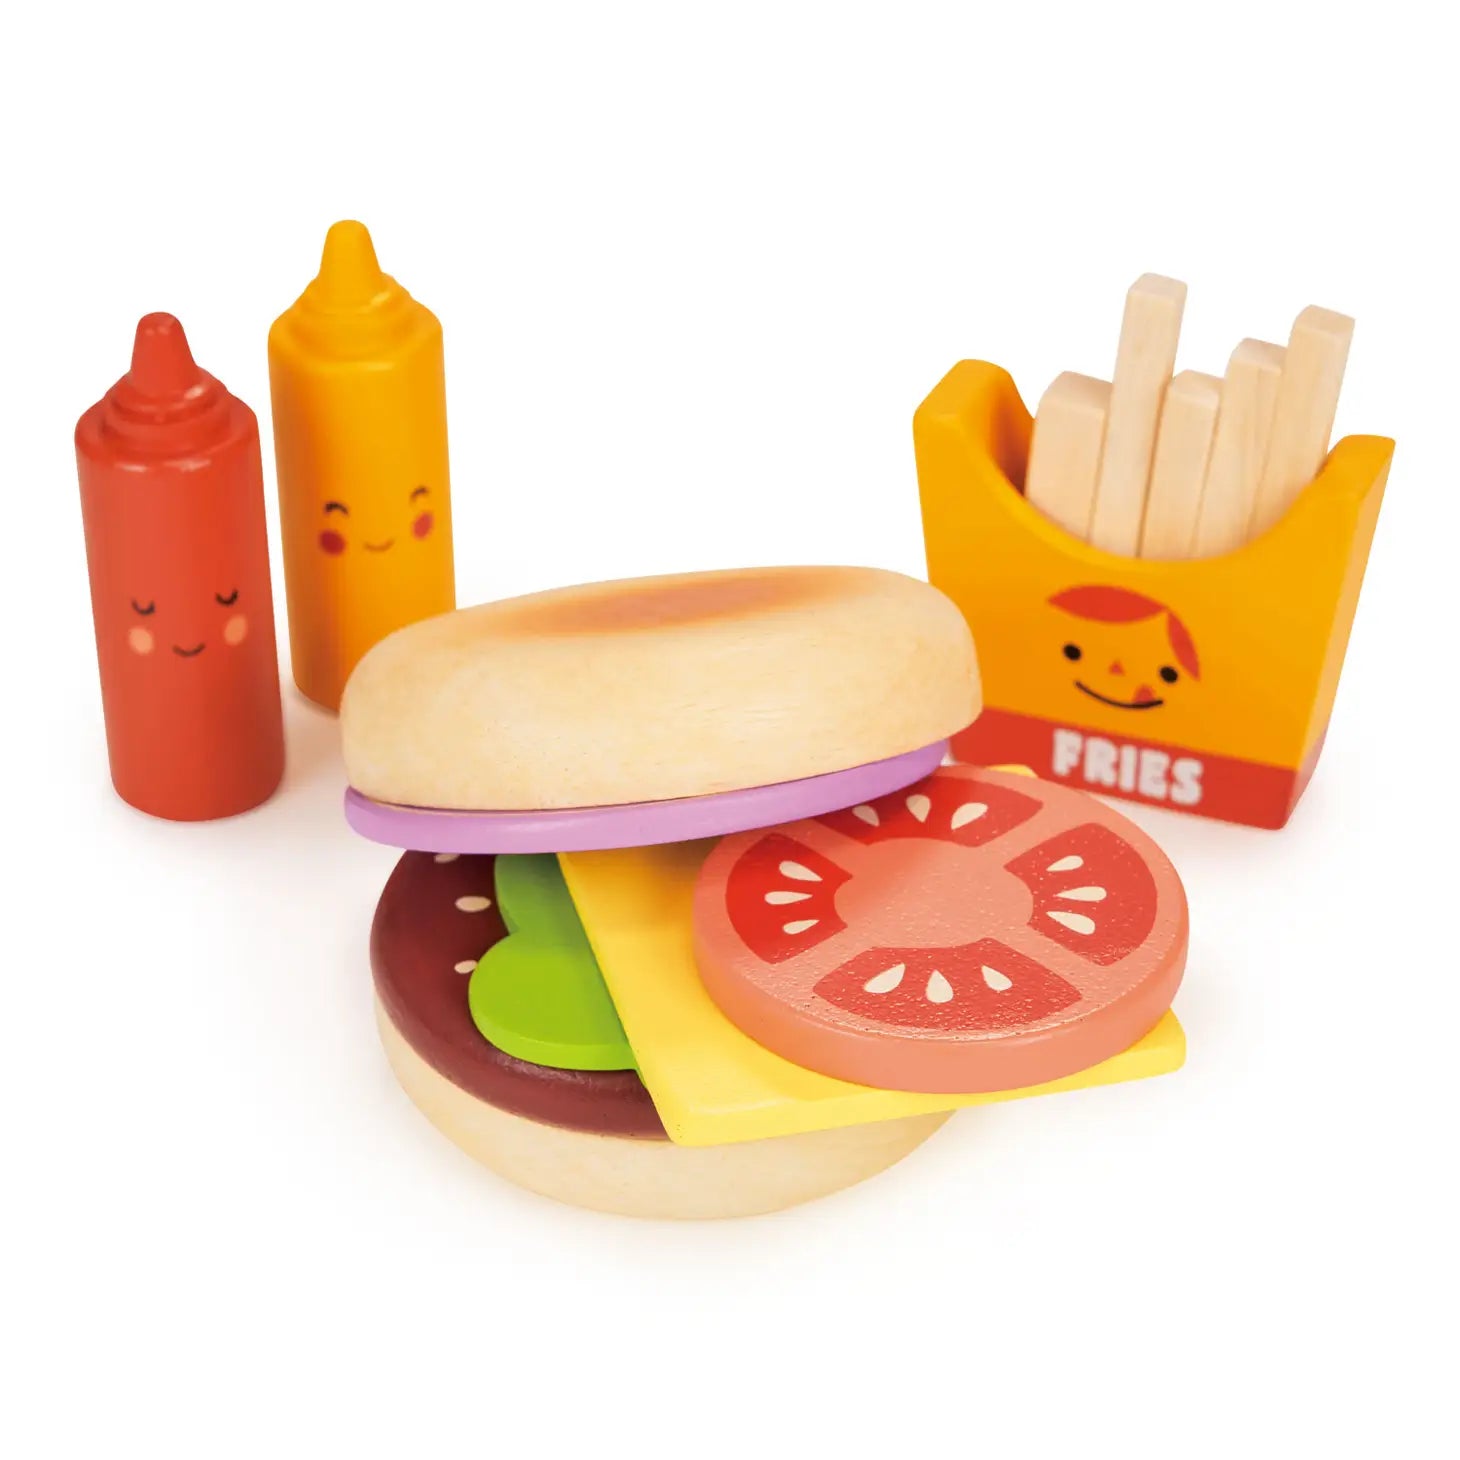 Wooden Toy Take Out Burger Set